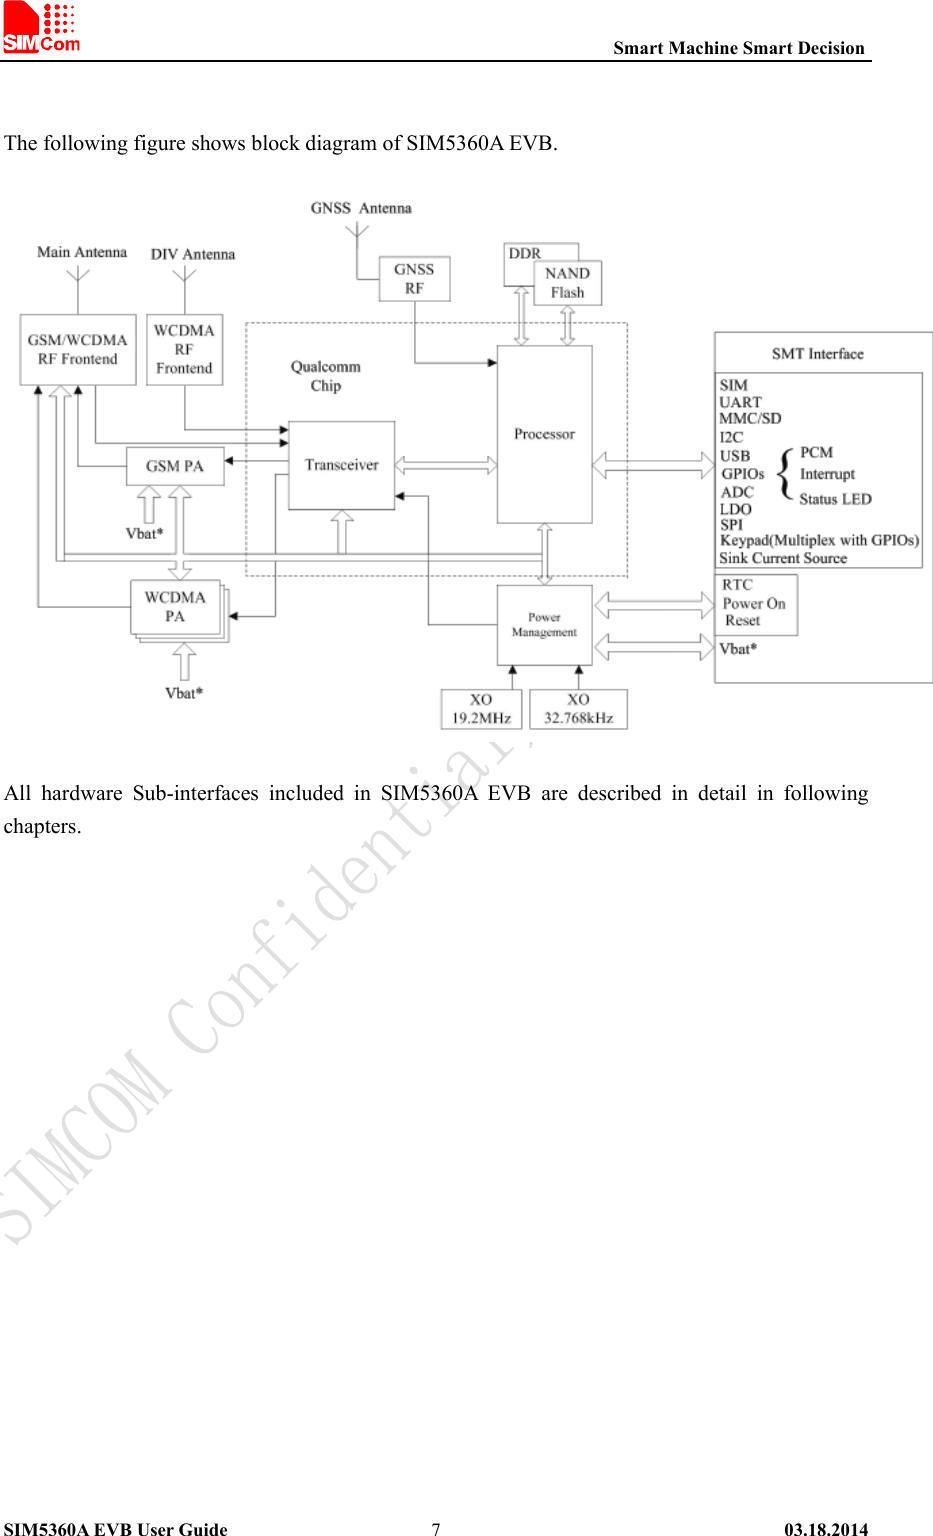                                                          Smart Machine Smart Decision SIM5360A EVB User Guide   03.18.2014   7  The following figure shows block diagram of SIM5360A EVB.    All  hardware  Sub-interfaces  included  in  SIM5360A  EVB  are  described  in  detail  in  following chapters.  